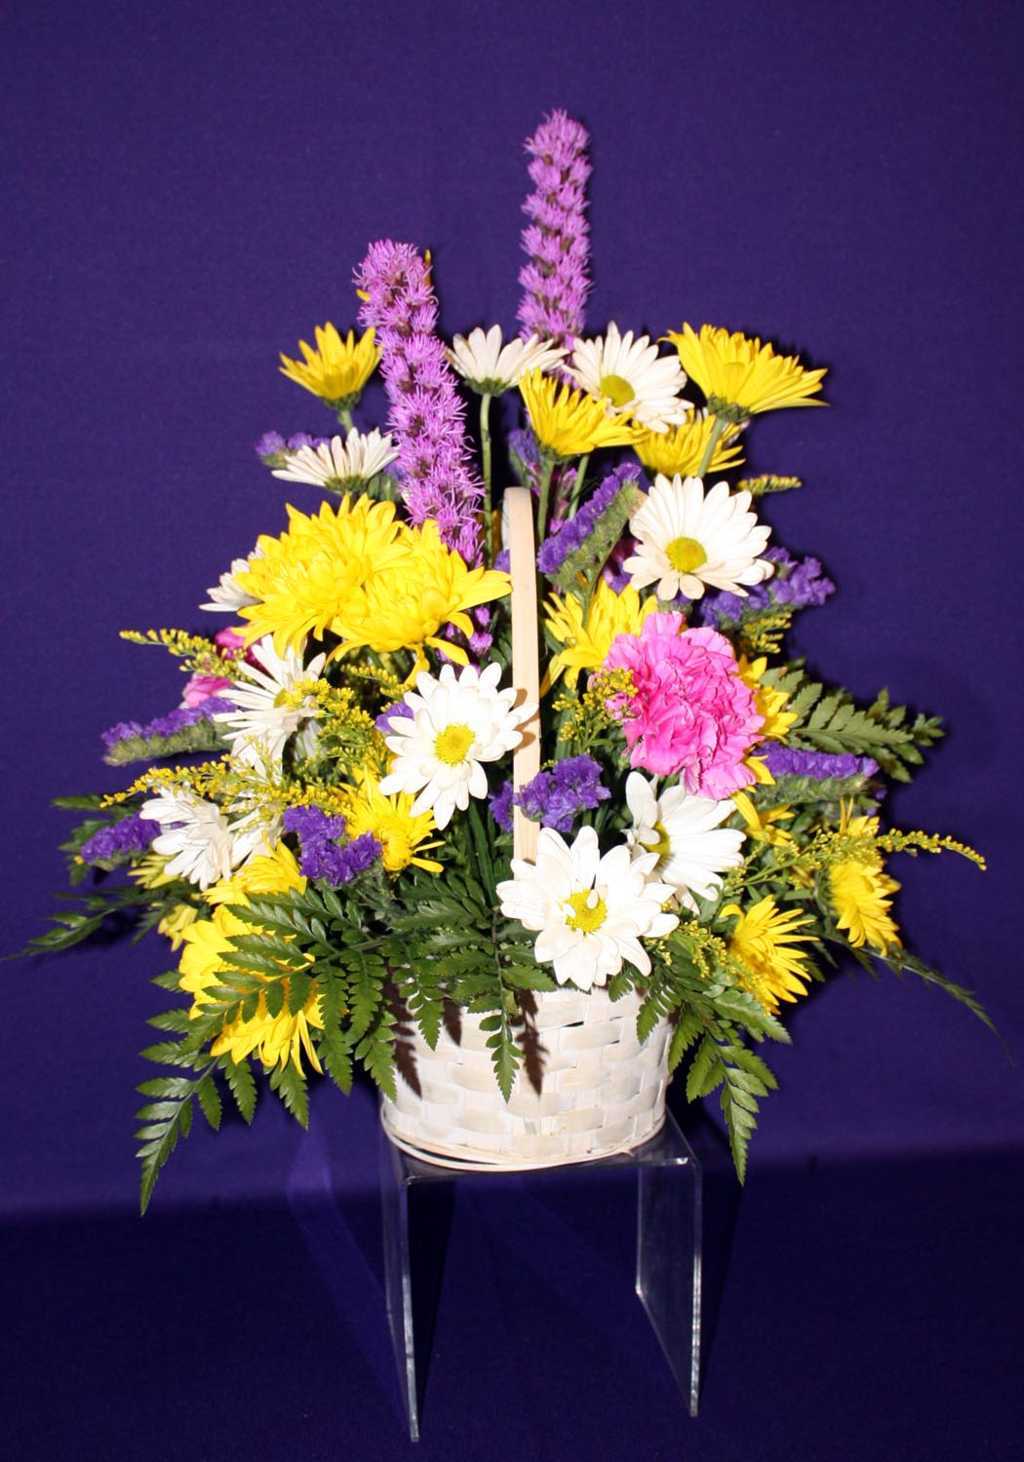 Yellow mums and white daises in a basket from Mon General Hospital Gift Shop 